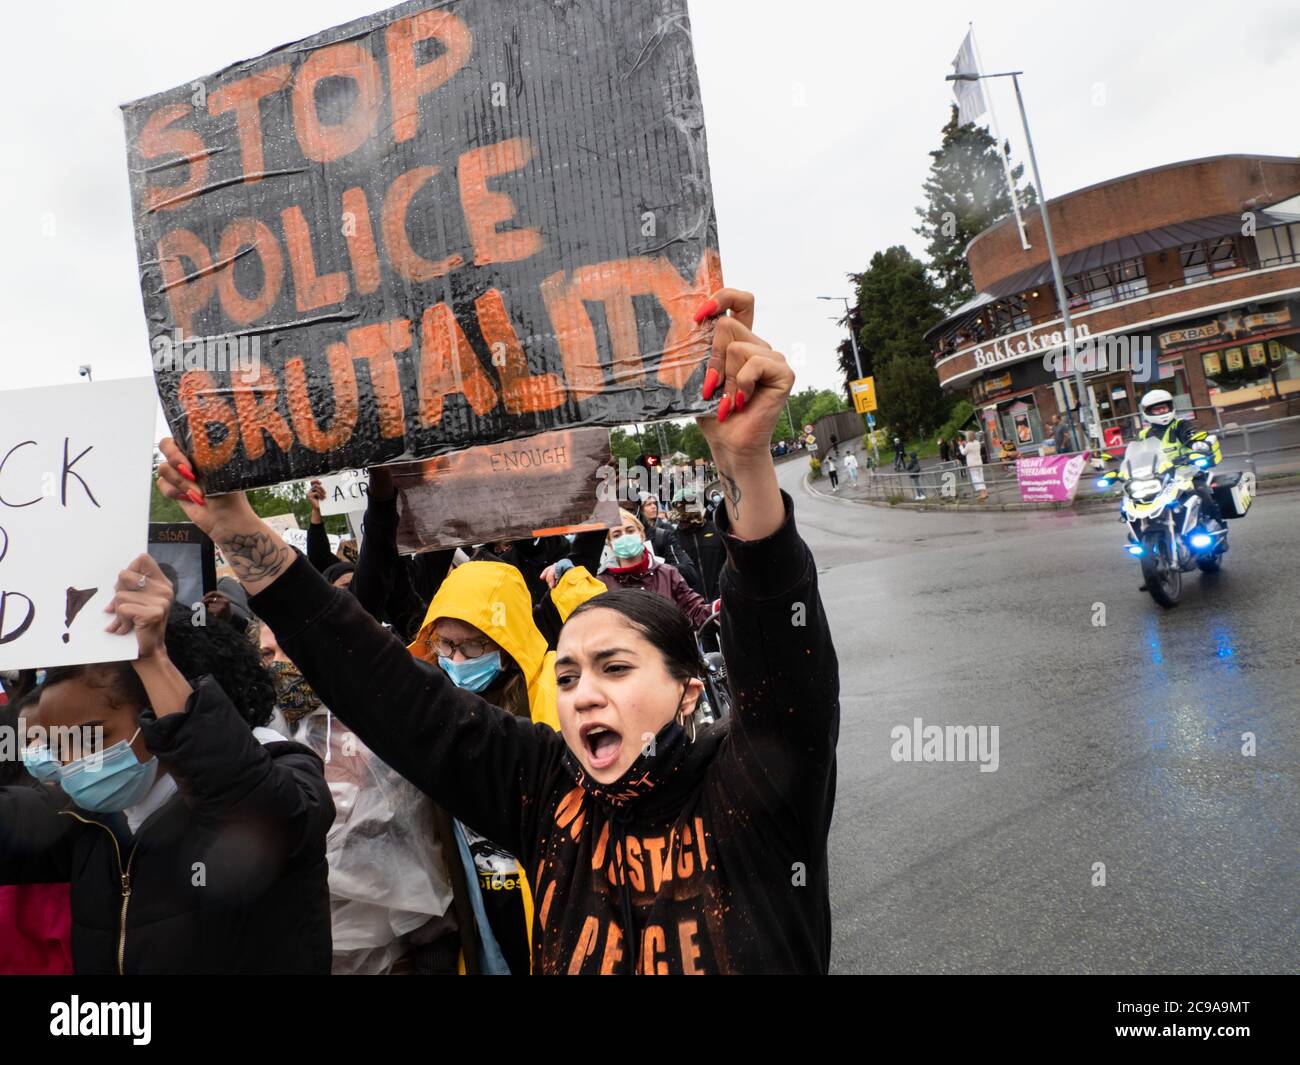 OSLO - JUNE 5, 2020: Thousands march from the U.S. embassy to Norwegian parliament to express solidarity with the Black Lives Matter movement, Oslo, Norway, June 5, 2020. Stock Photo